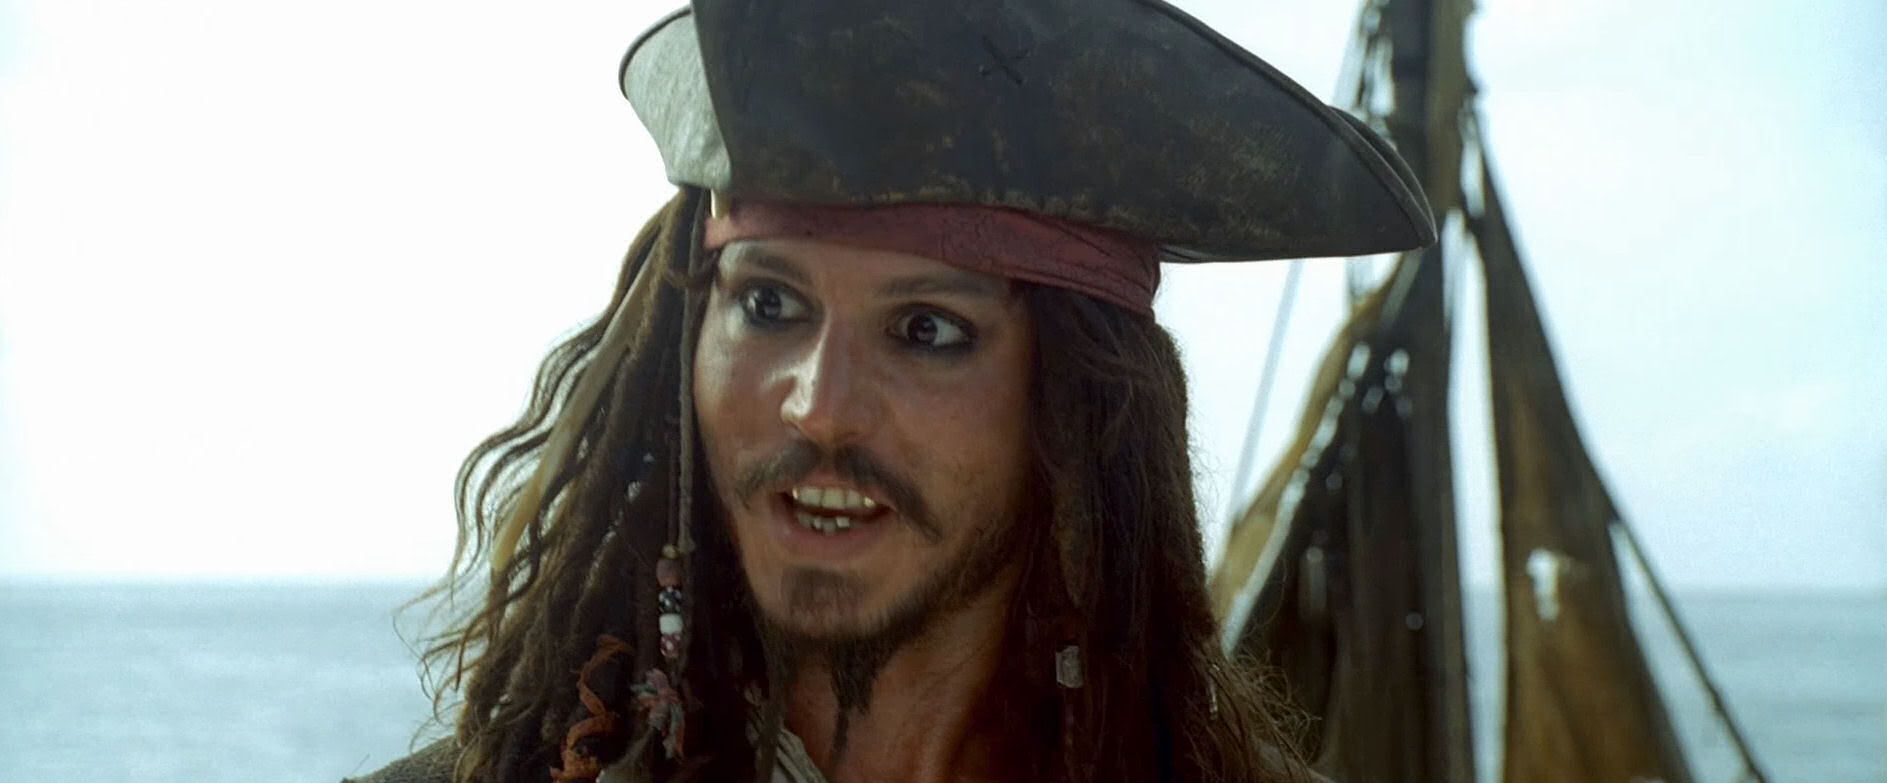 http://i4.photobucket.com/albums/y144/deepintodepp/Pirates%20At%20Worlds%20End/ScreenCaps%20from%20Clips/000000591.jpg